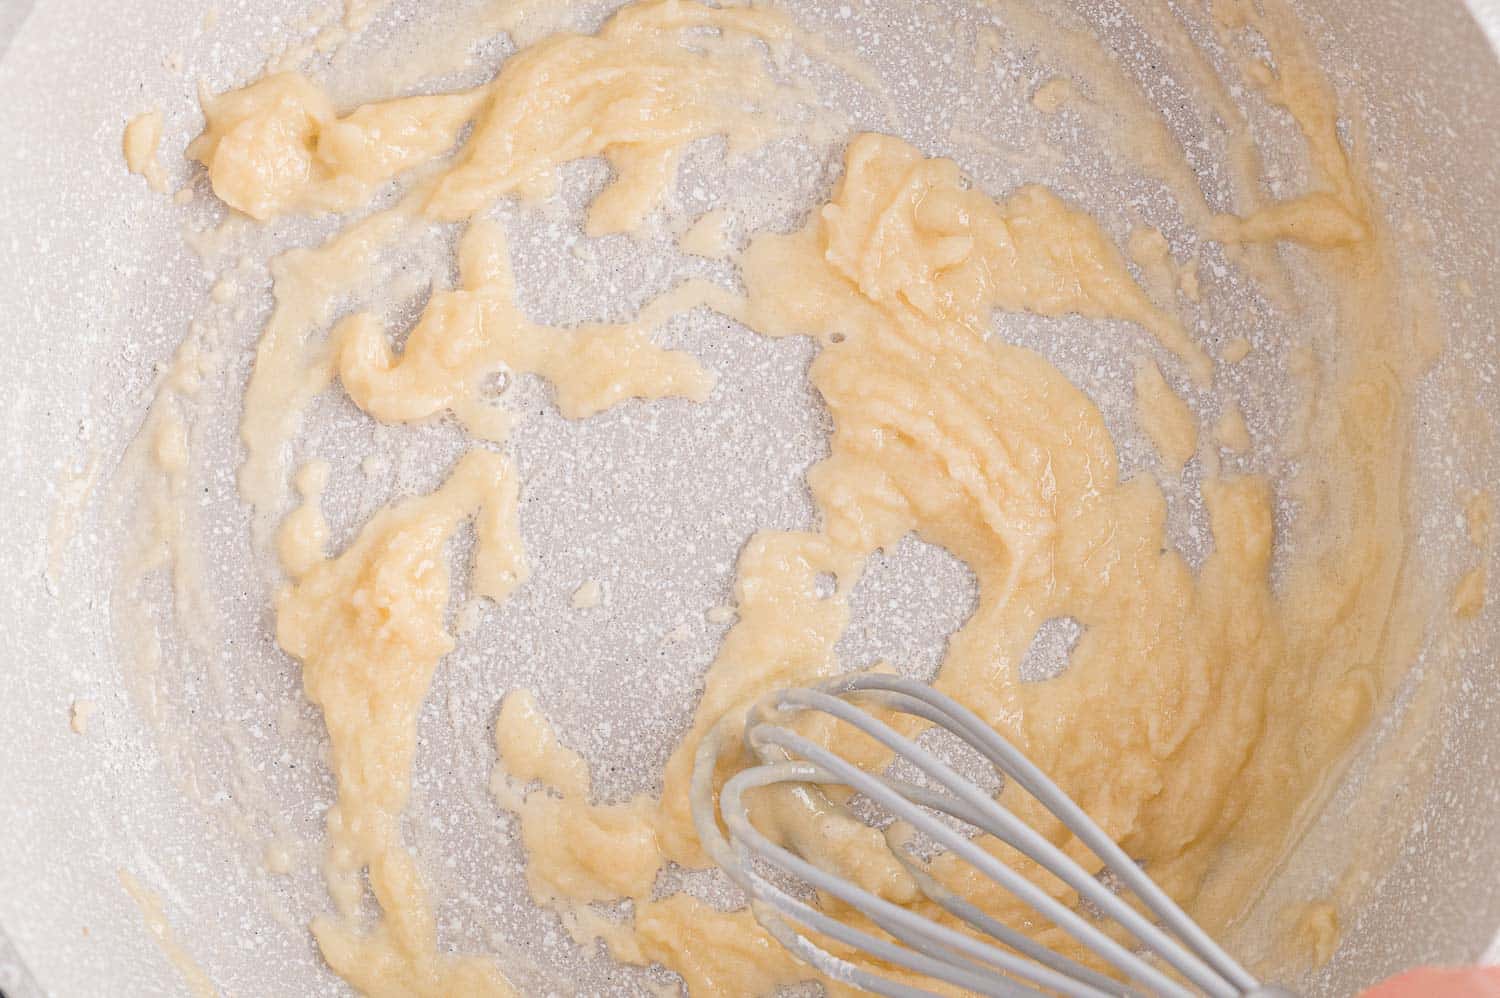 Butter and flour being whisked.